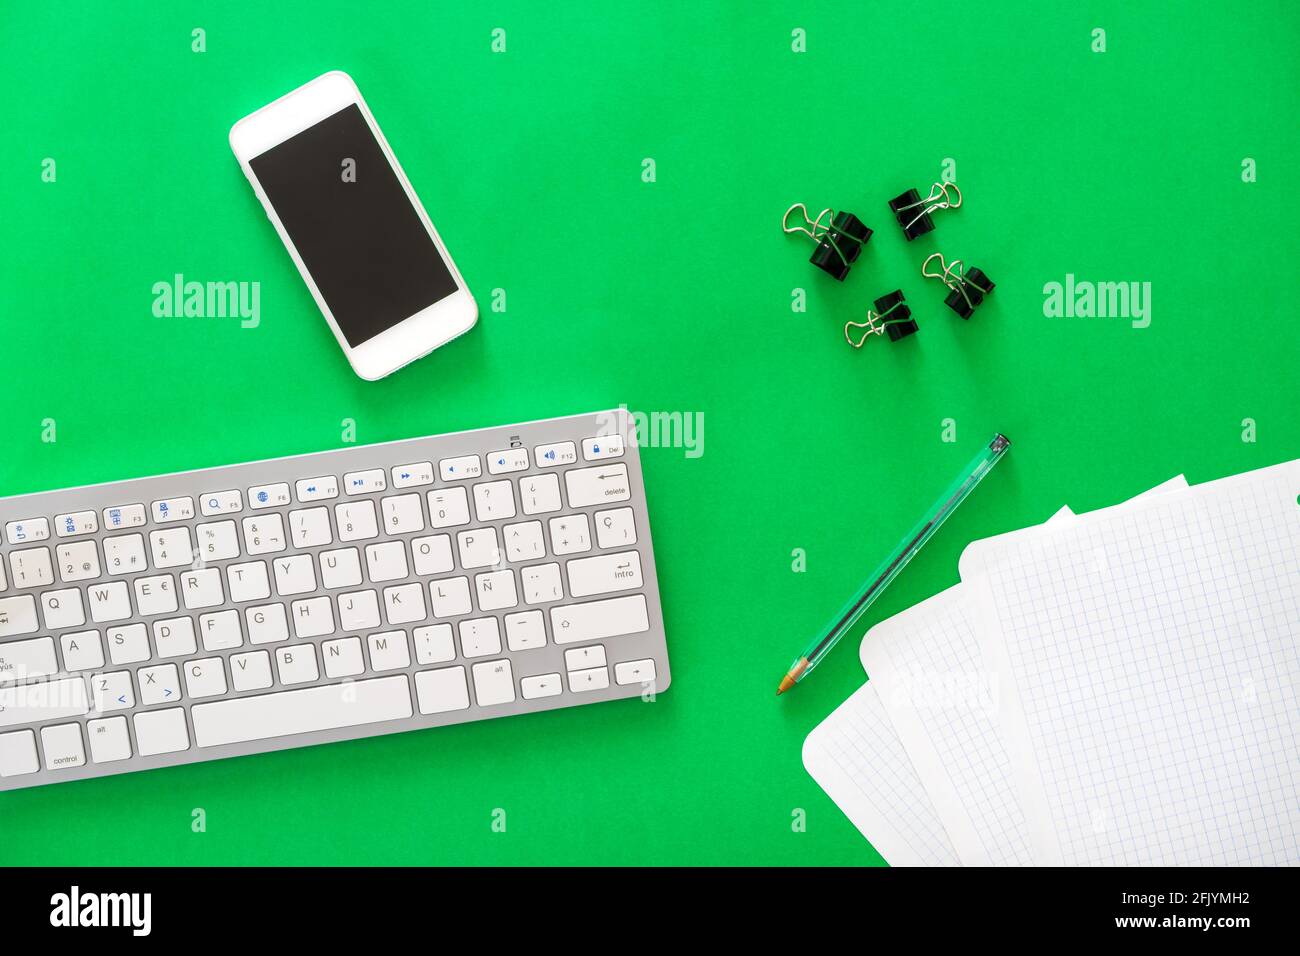 mobile phone, wireless keyboard, pen, papers and clips on green background Stock Photo